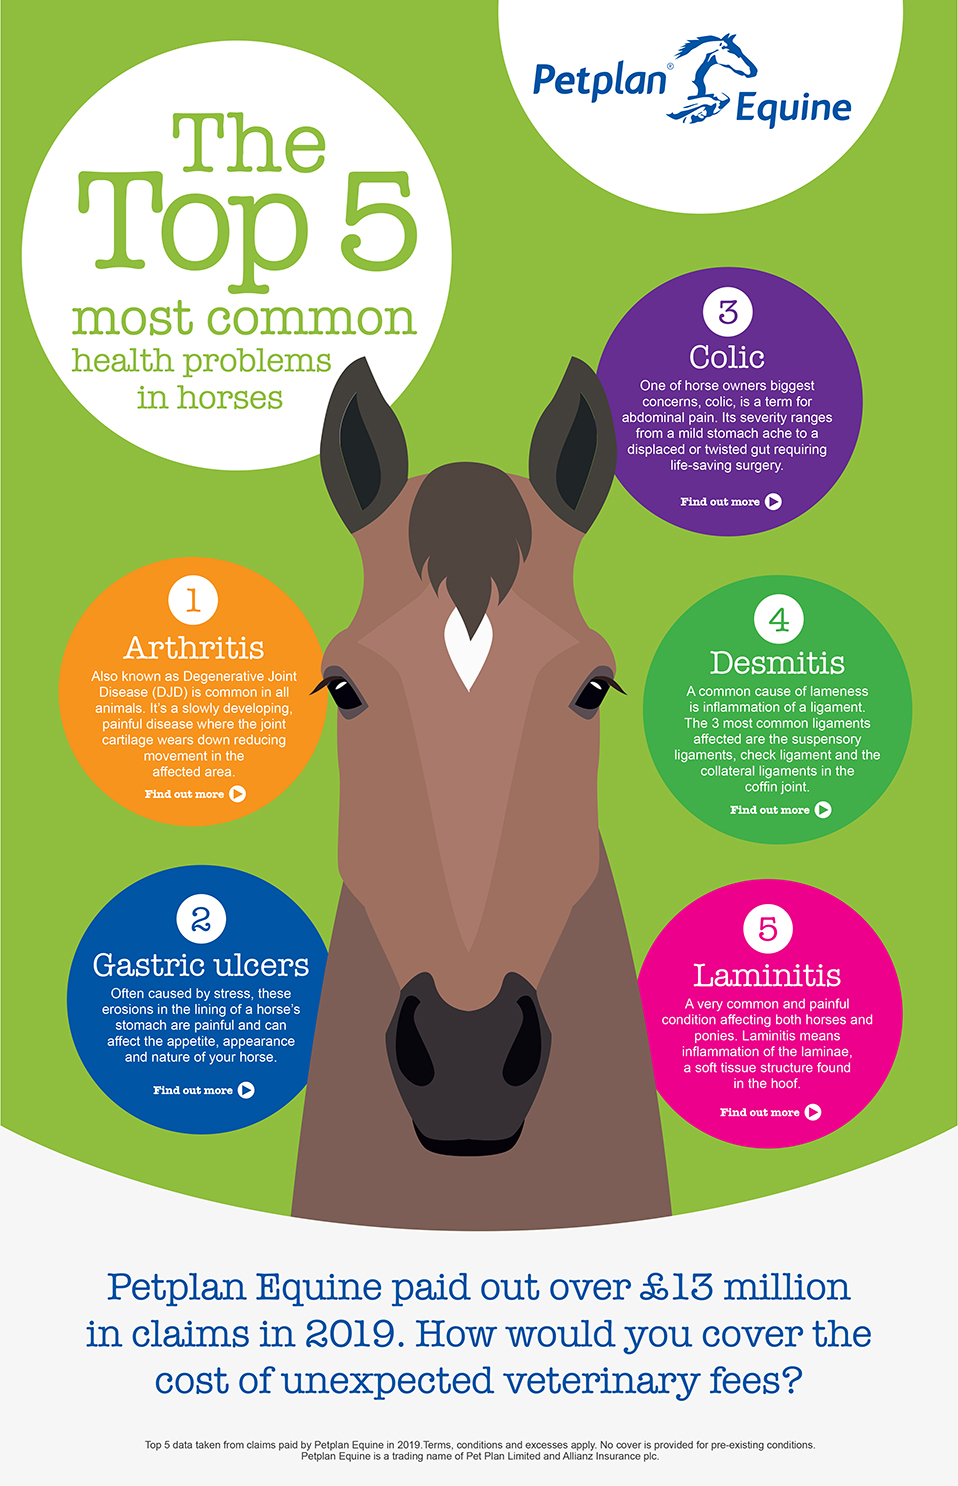 Top 5 Most Common Health Problems in Horses infographic